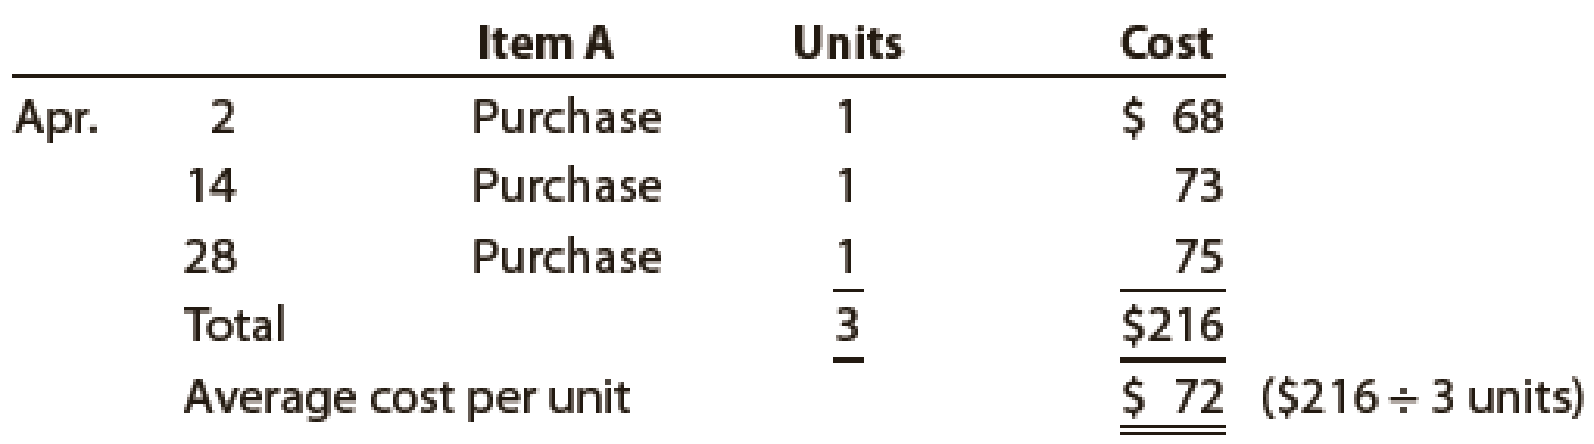 Chapter 7, Problem 1PEA, The following three identical units of Item A are purchased during April: Assume that one unit is 